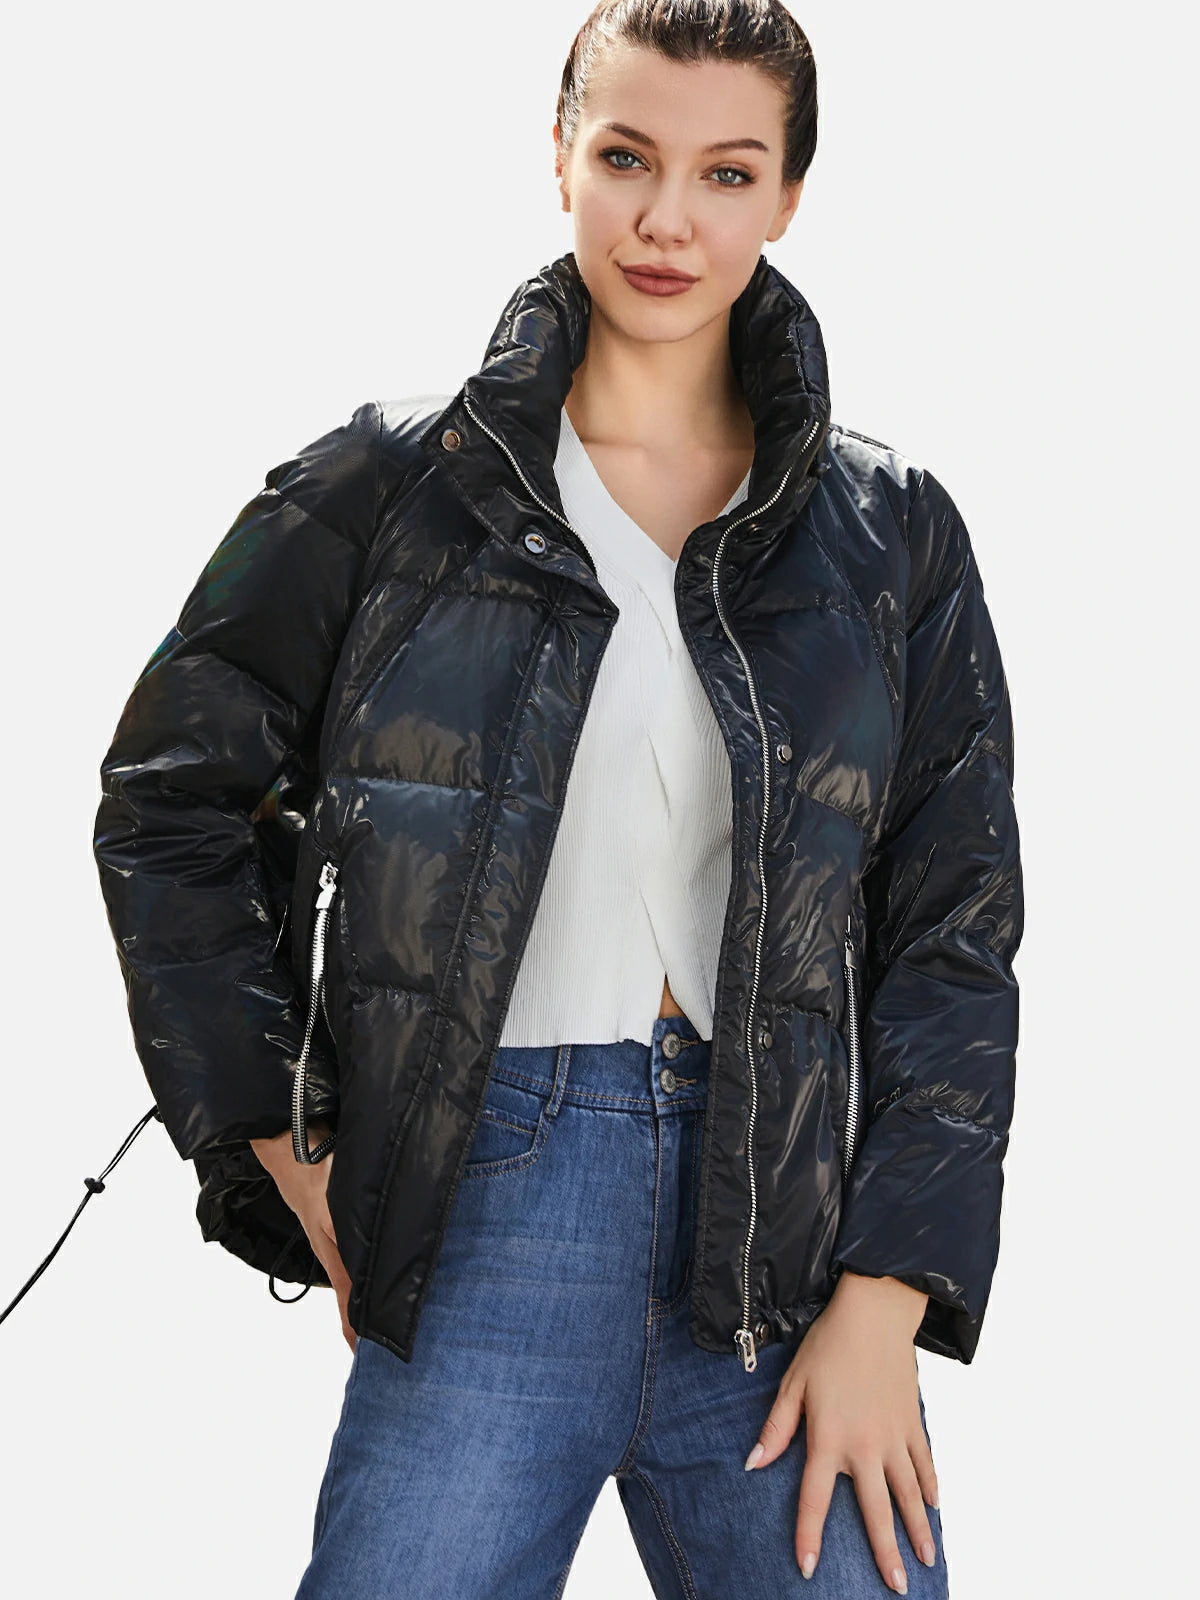 Fashionable style of a stand-up collar down jacket for the winter season